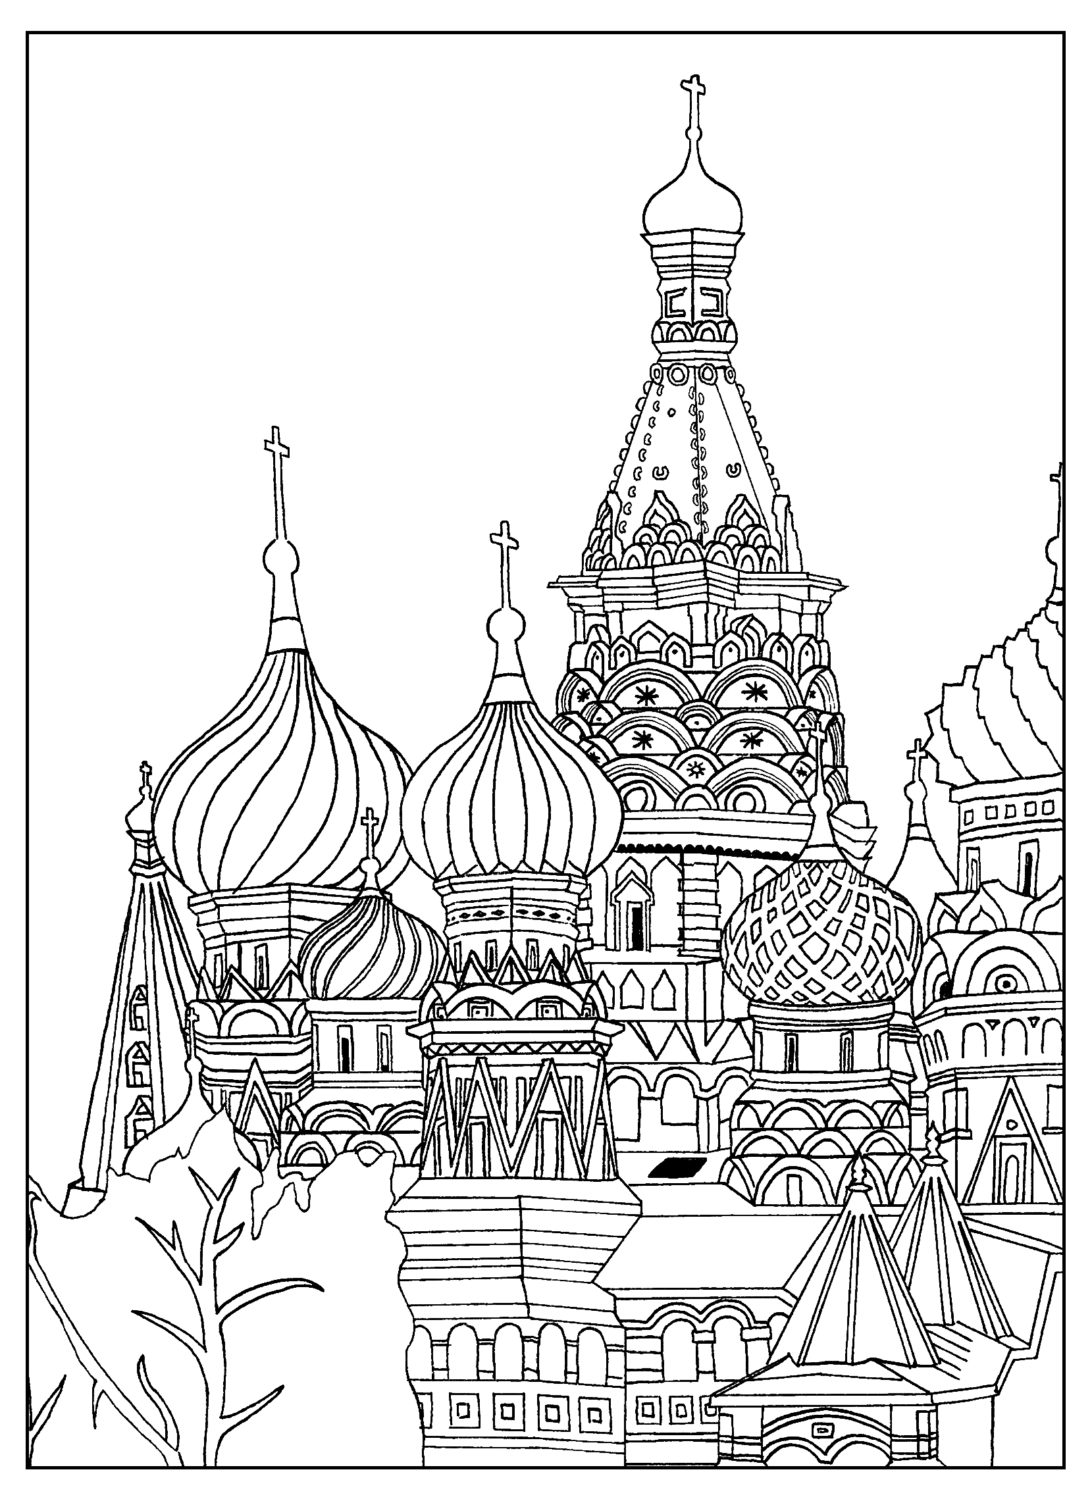 Top 22 Mean City Buildings Coloring Pages Tower At ...